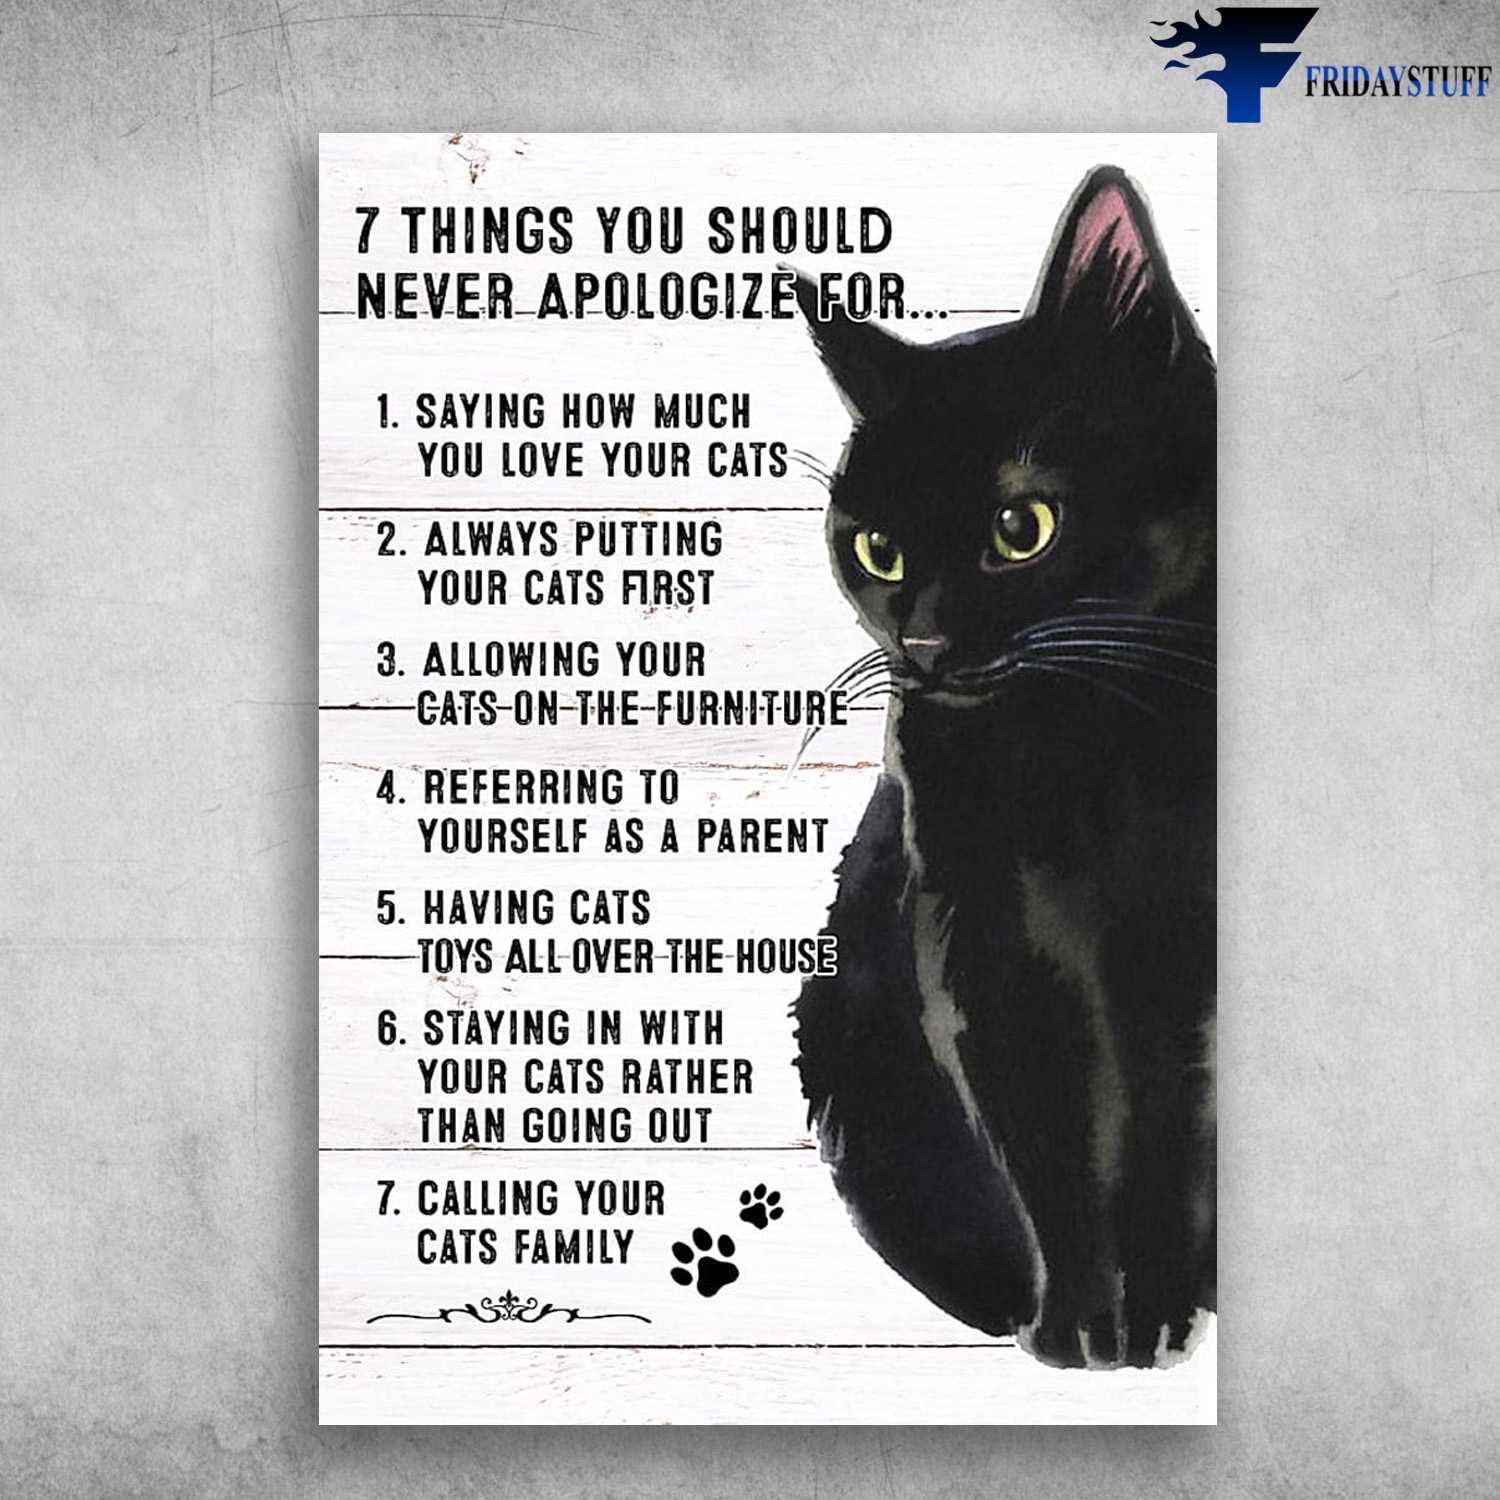 Black Cat Poster, Black Cat, 7 Things You Should Never Apologize For, Saying How Much You Love Your Cats, Always Putting Your Cats Fitst, Allowing Your Cats On The Furn Ture